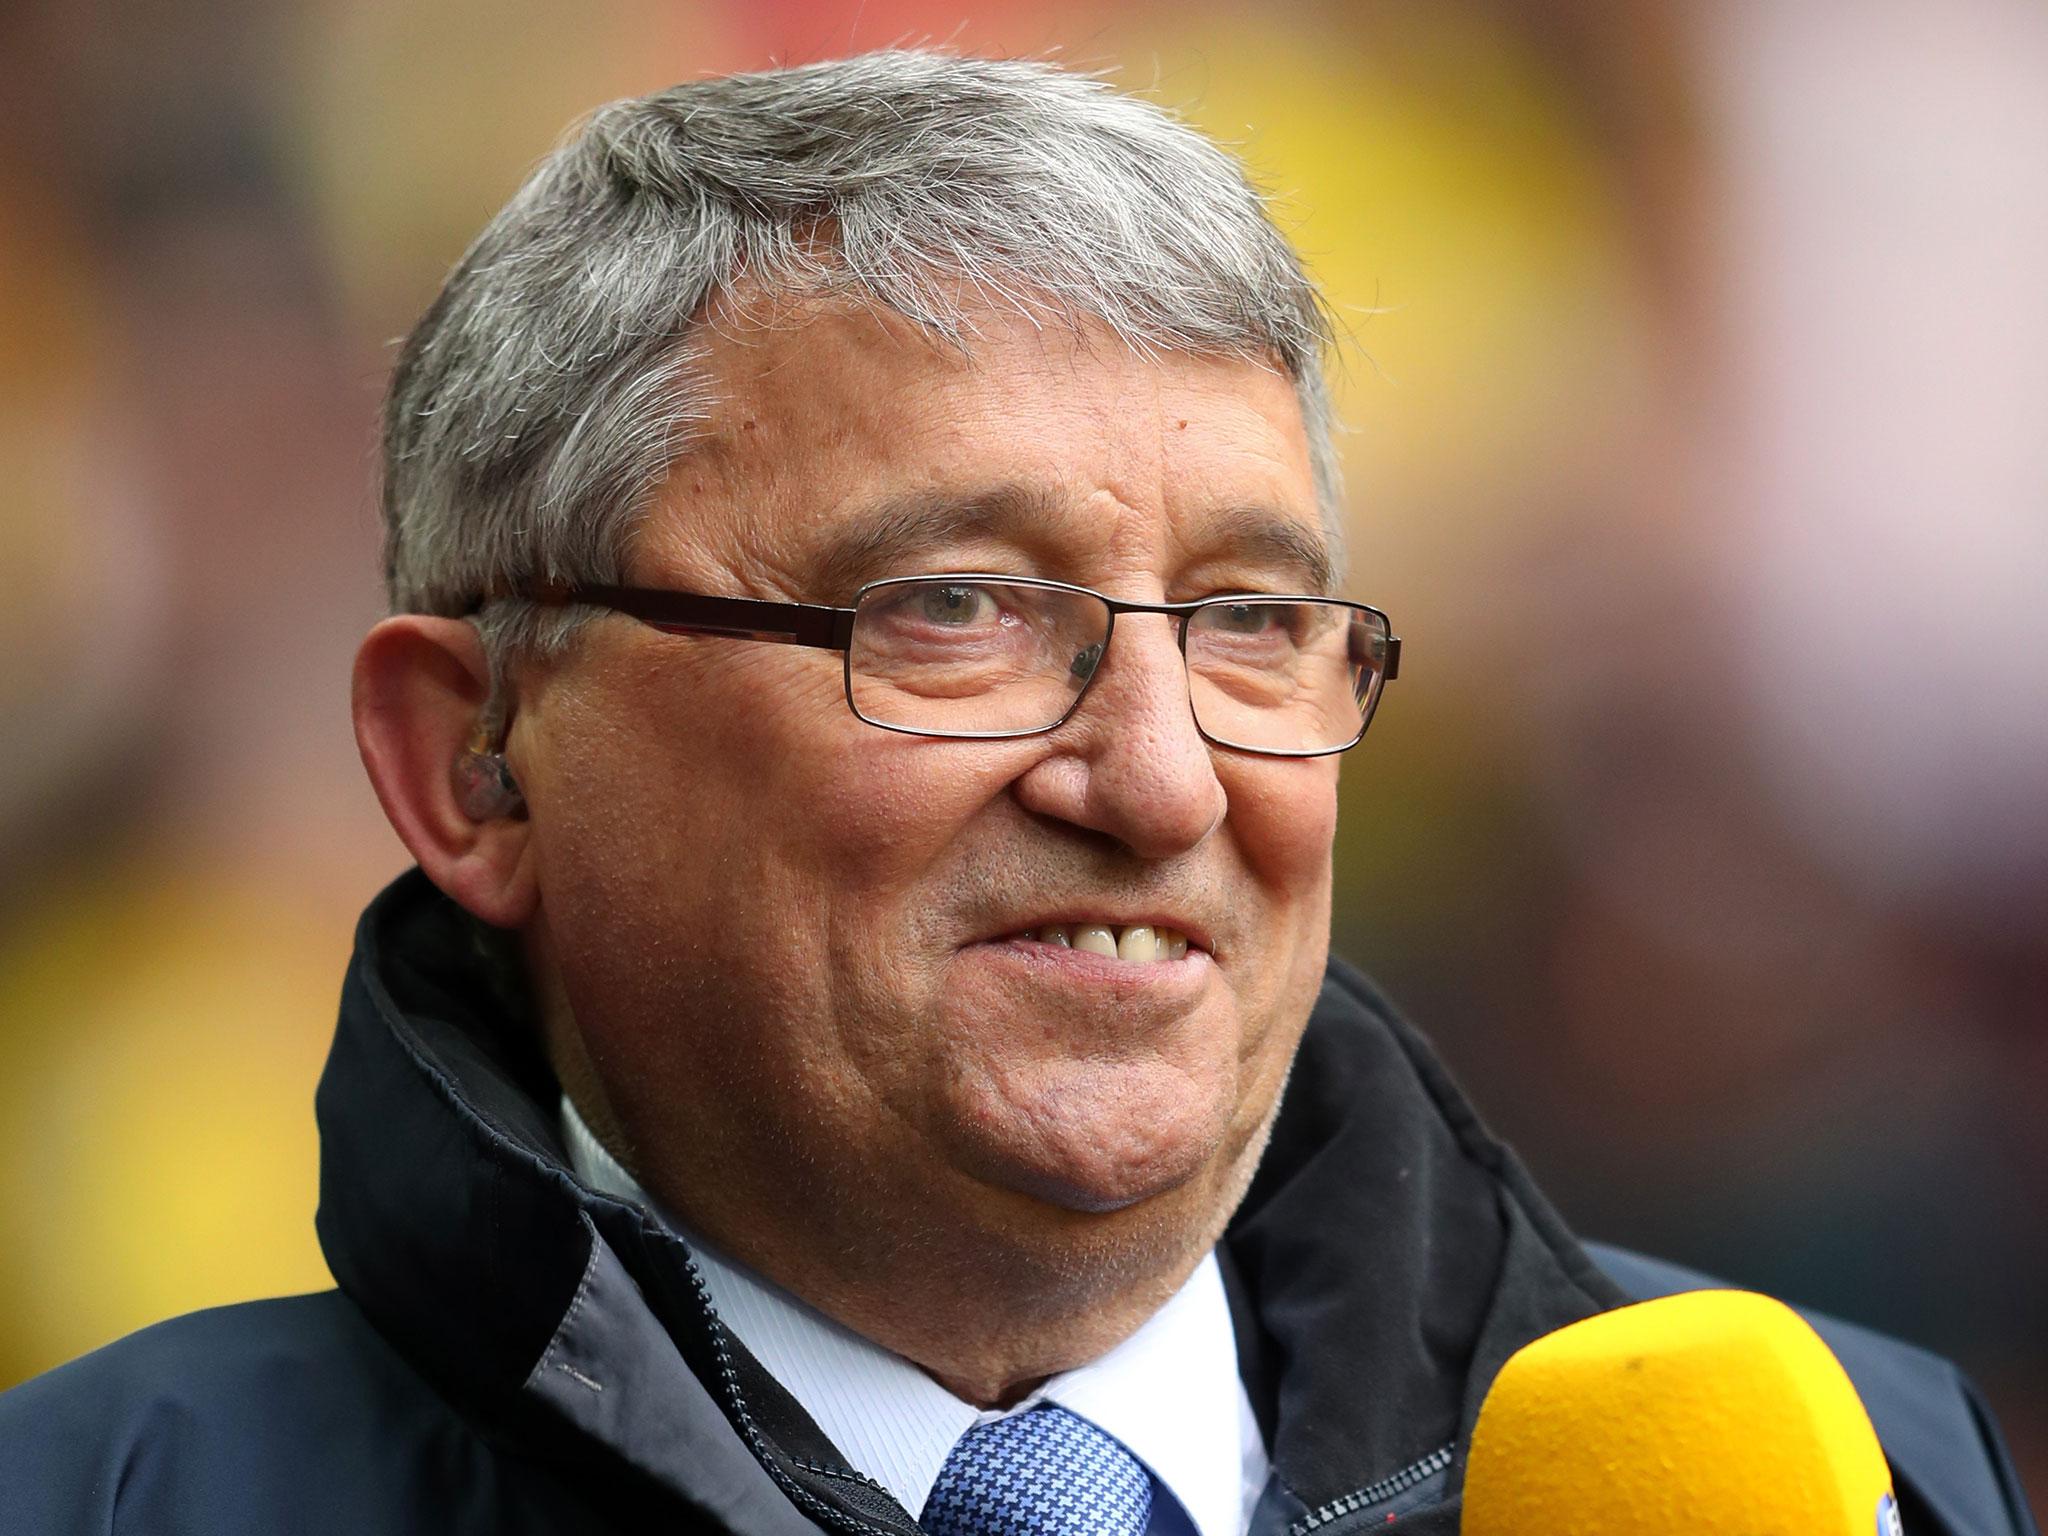 Graham Taylor died after suffering a heart attack, aged 72